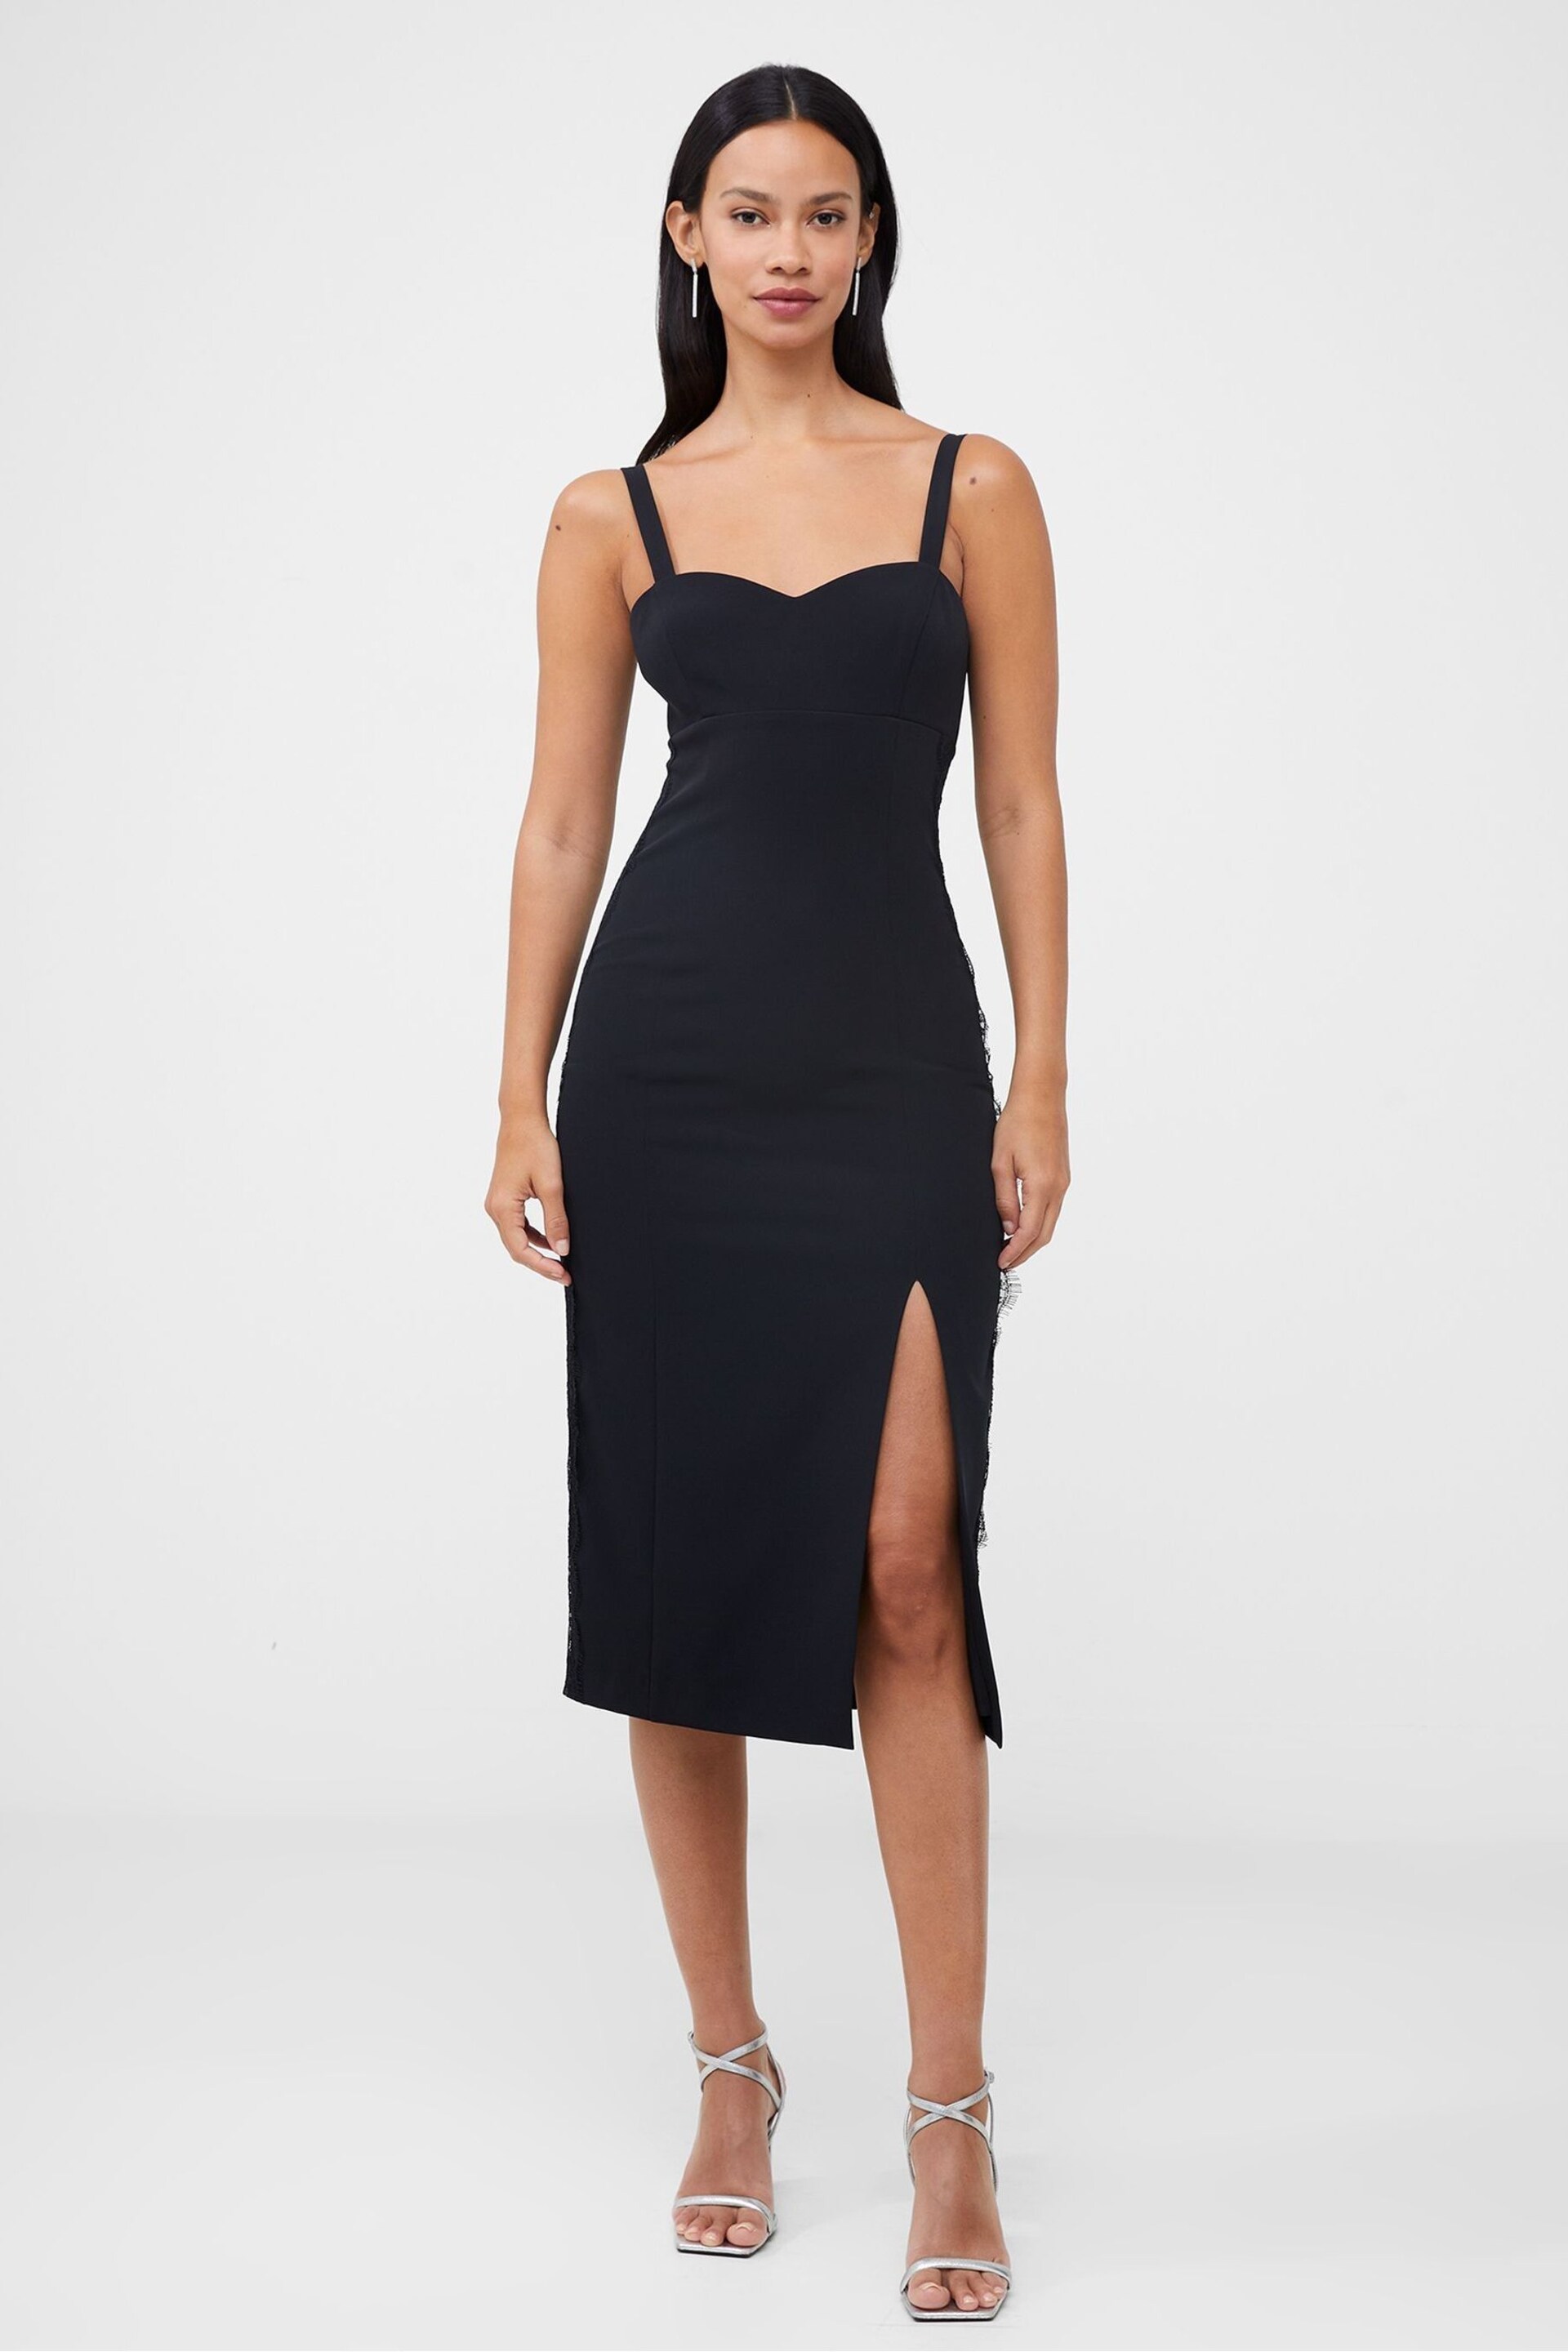 French Connection Echo Crepe Dress - Image 1 of 4